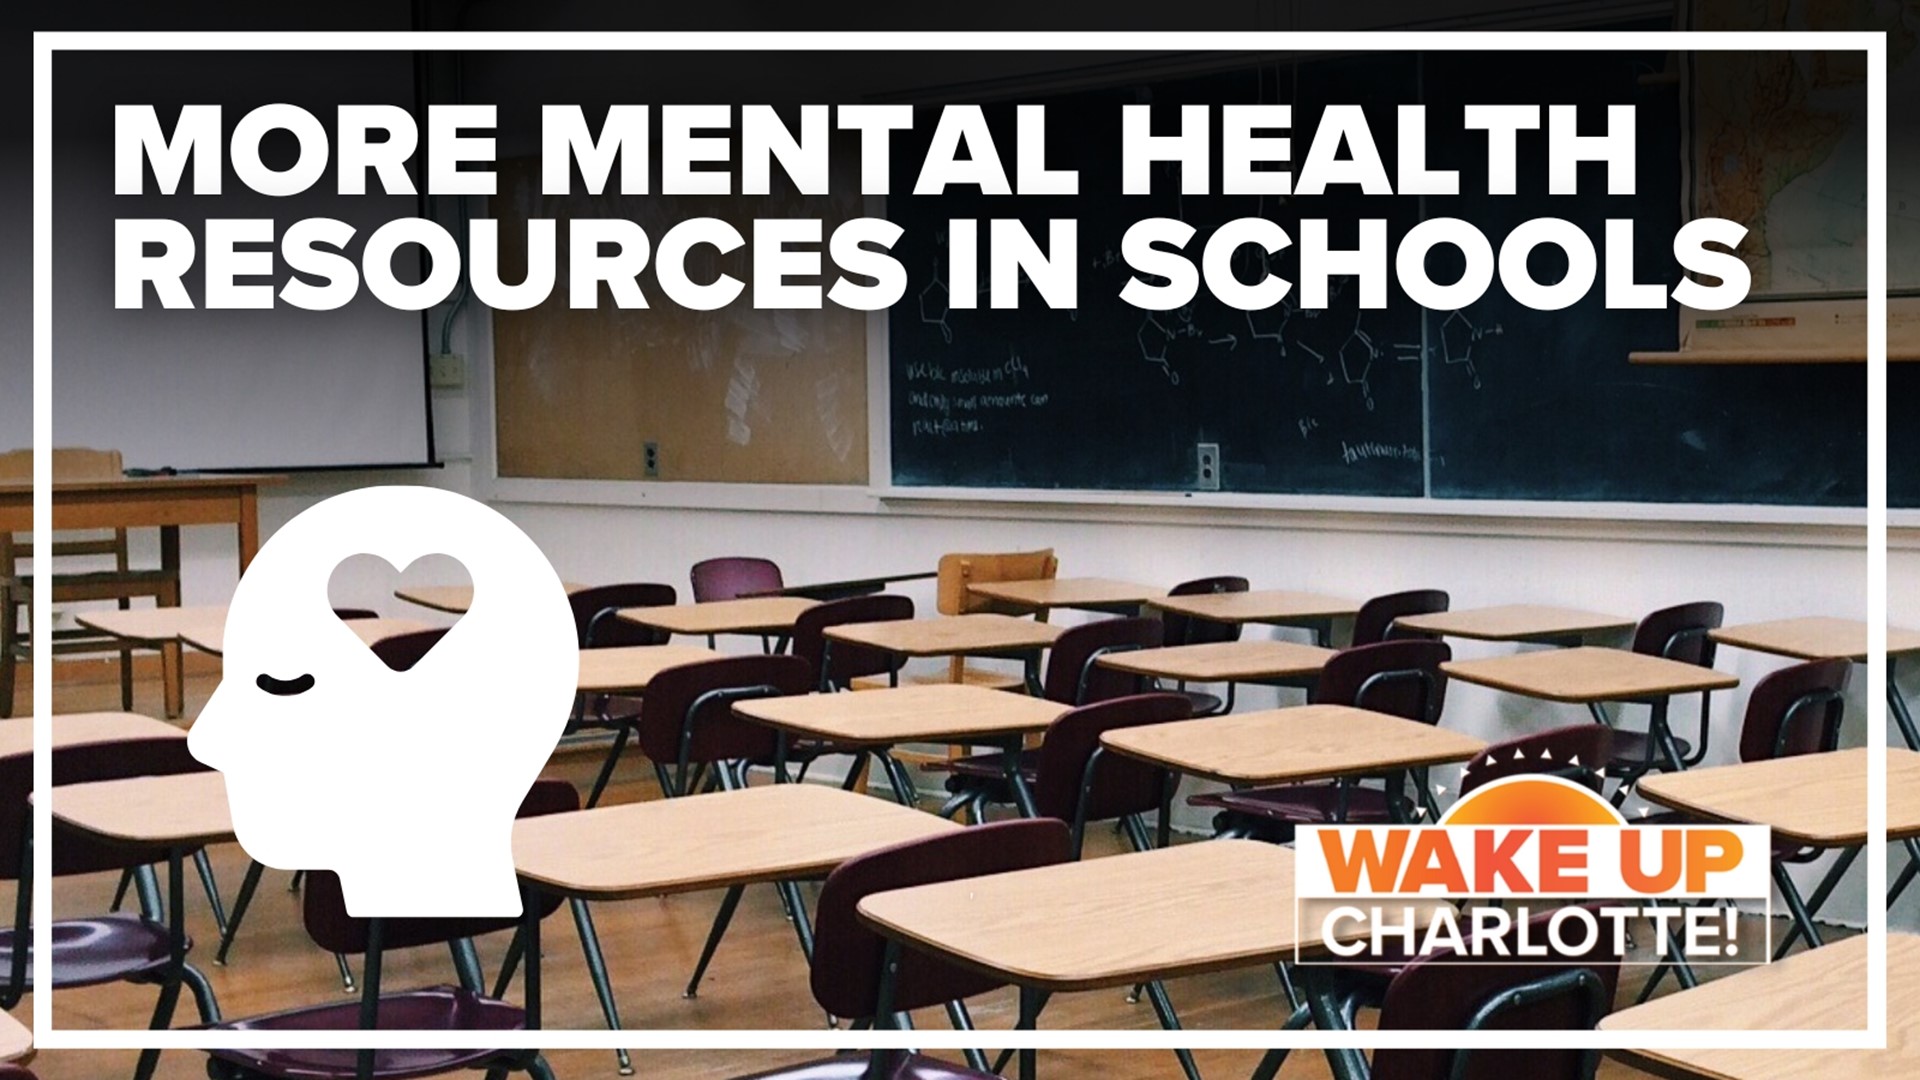 Data from the district shows Cabarrus County does not have the recommended staffing to help address the well-being of students.